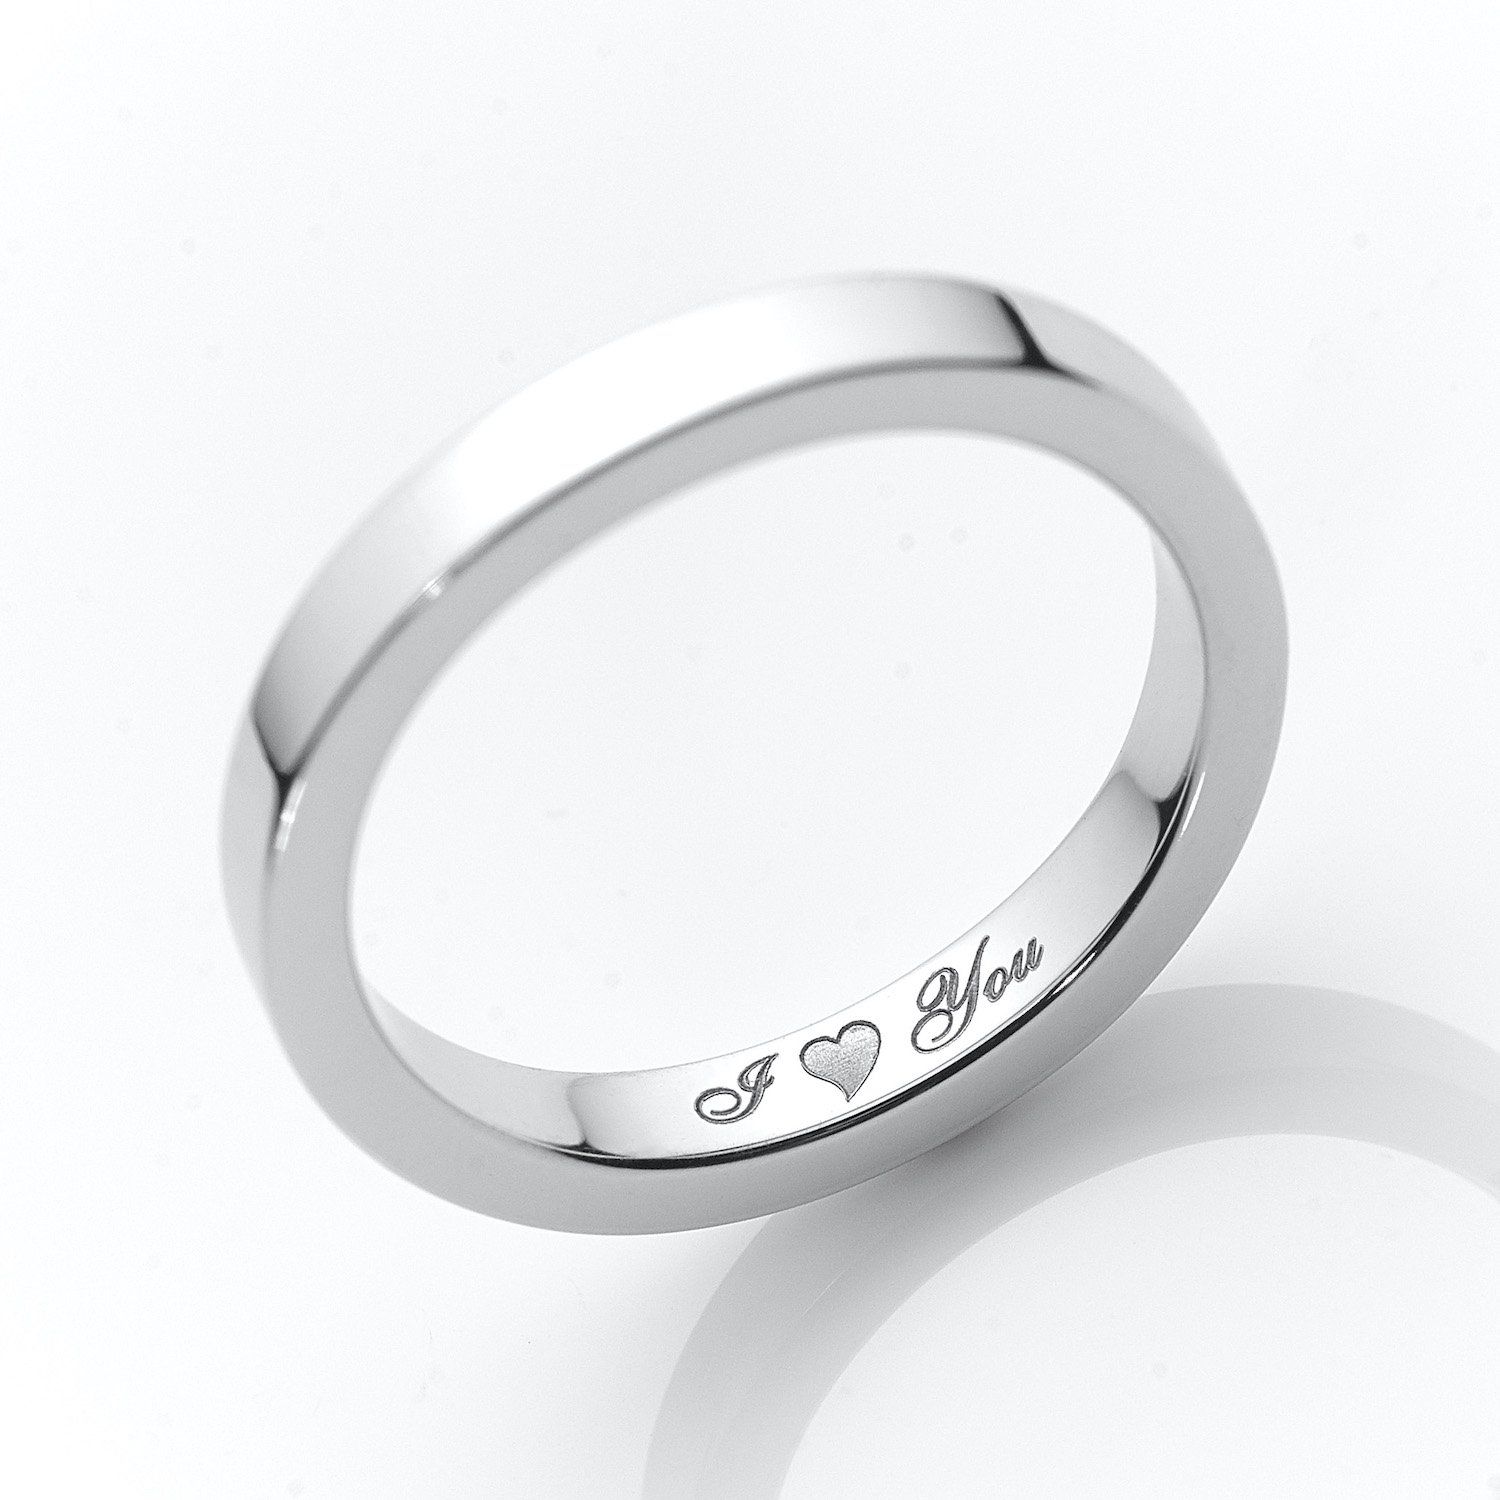 wedding band engraved with "I Love You" on the inside